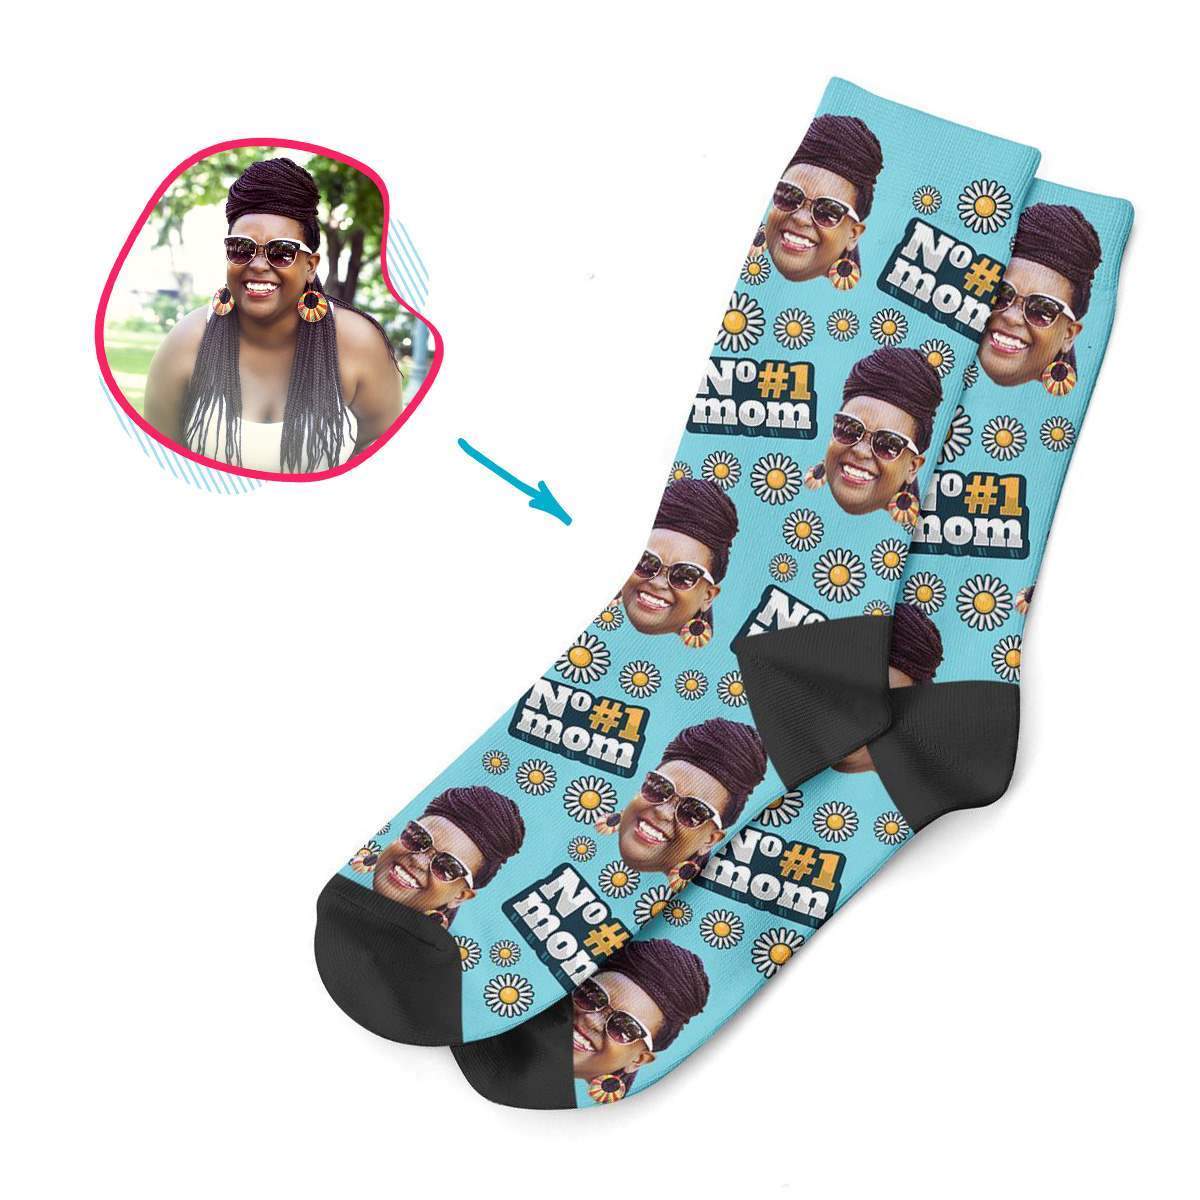 blue #1 Mom socks personalized with photo of face printed on them